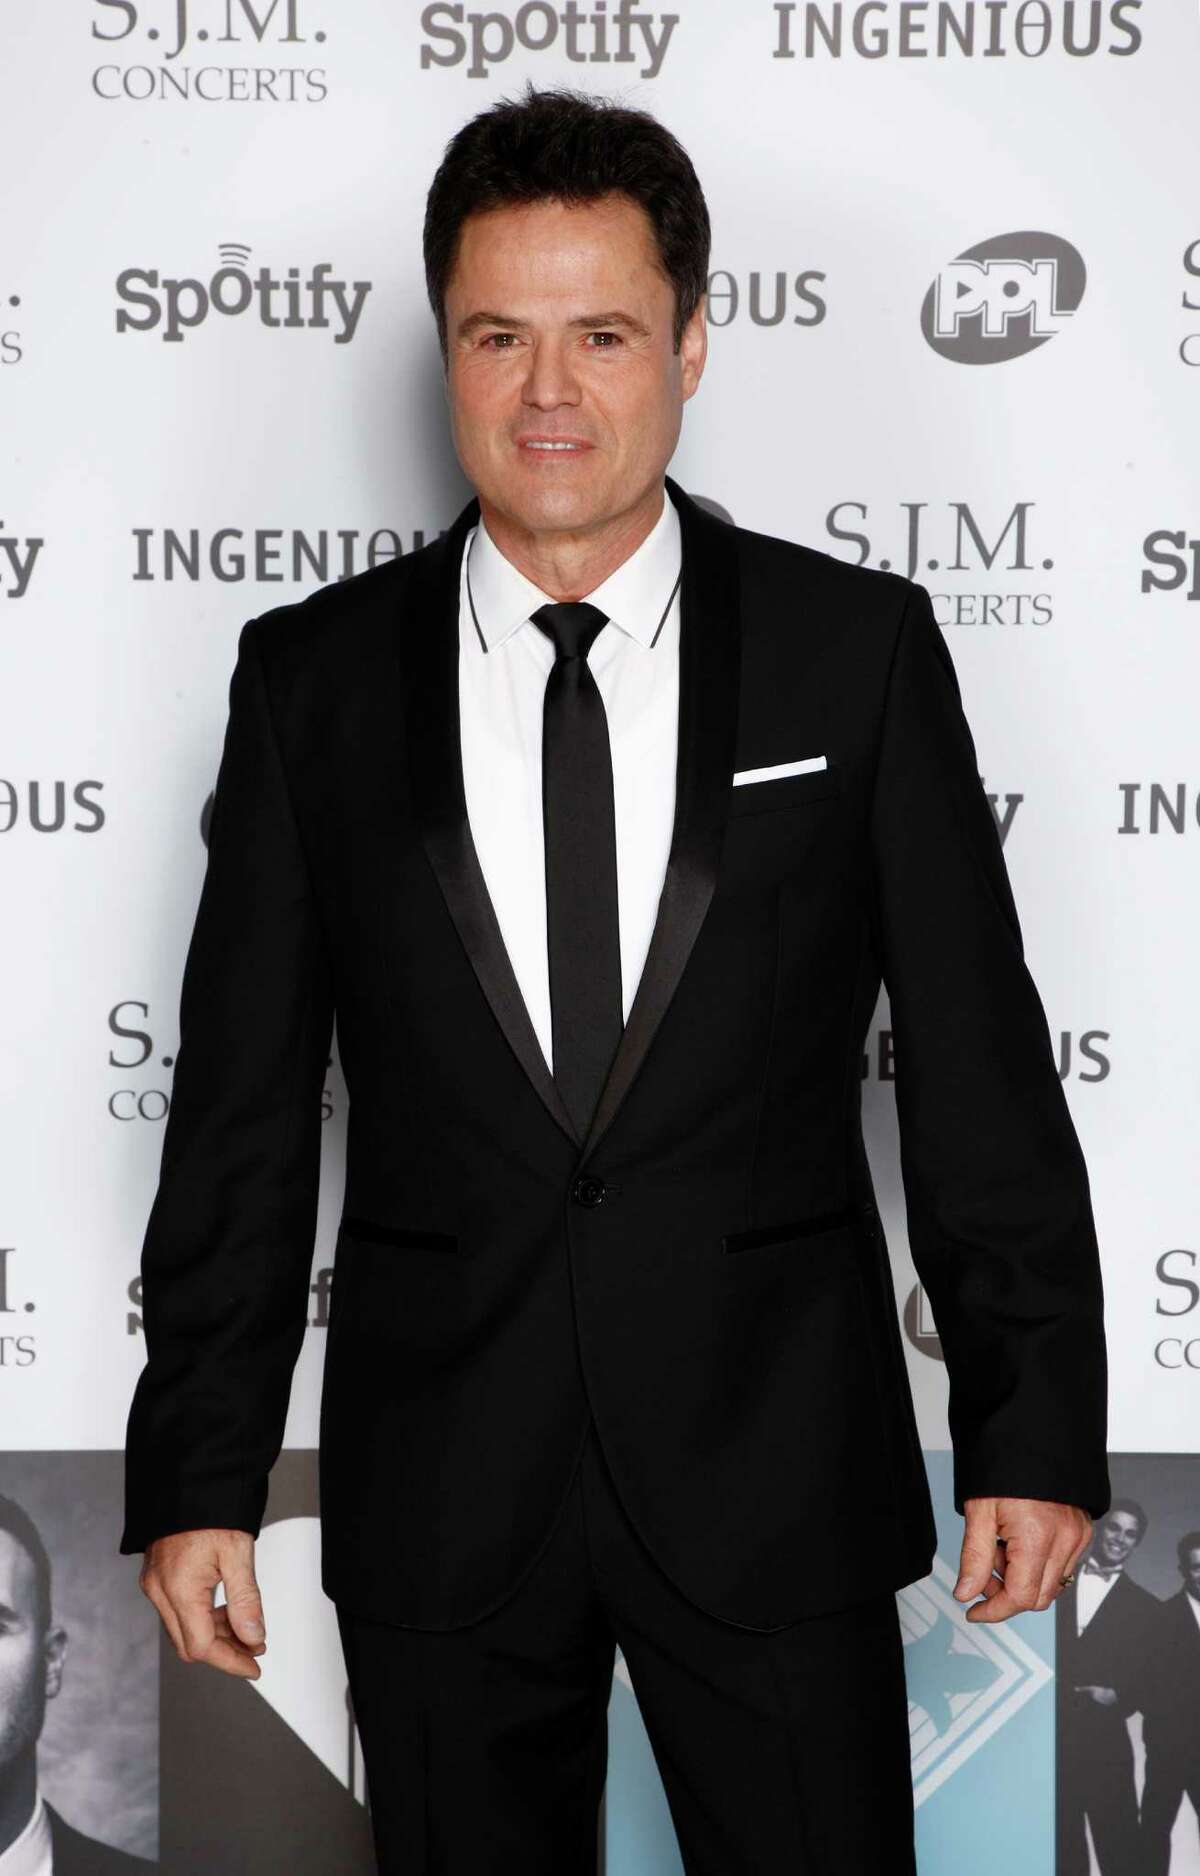 Donny Osmond arriving at the 2012 Music Industry Trusts Award ceremony at the Grosvenor House Hotel on Monday, Nov. 5, 2012, in London. (Photo by John Marshall JM Enternational/Invision/AP)